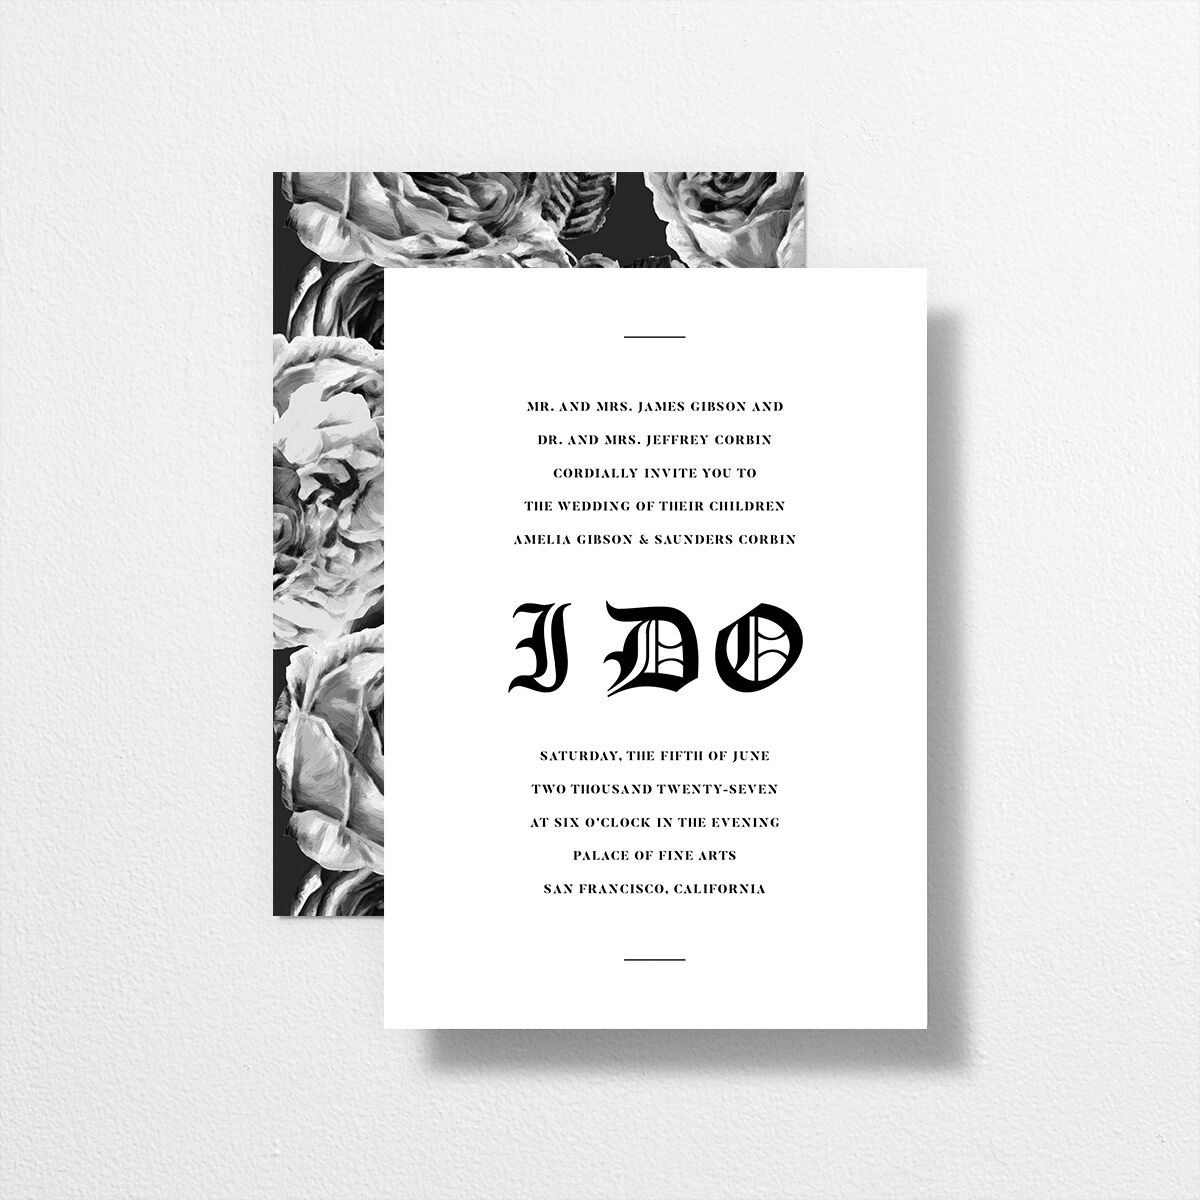 I Do Wedding Invitations by Vera Wang front-and-back in white